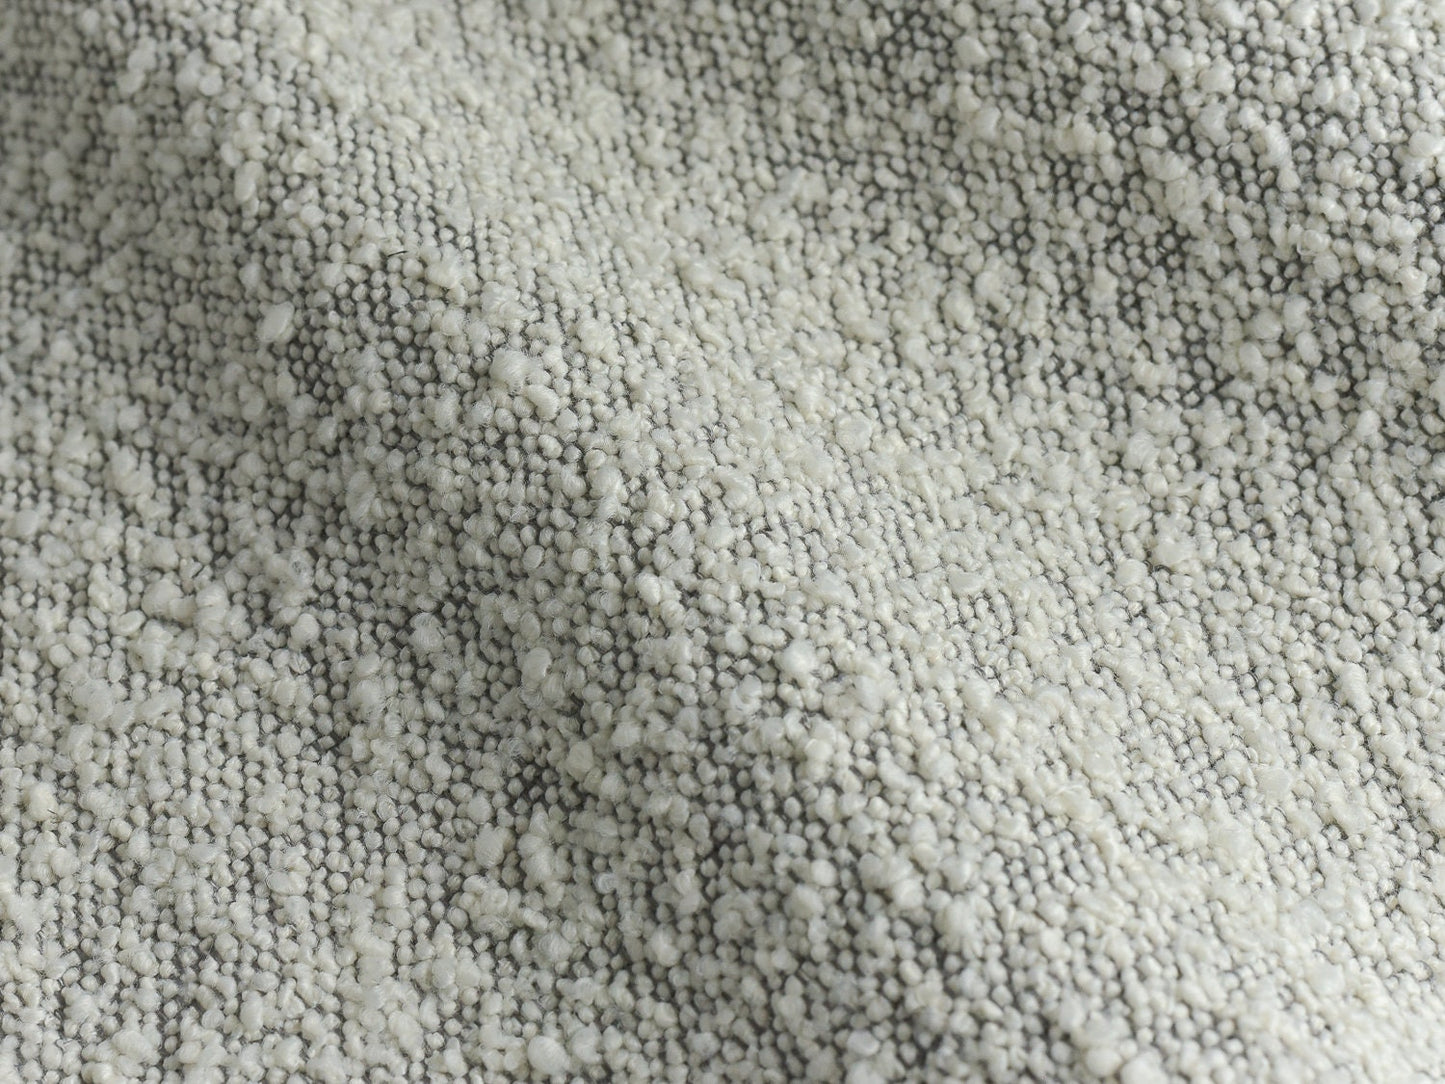 Ivory Boucle Cream Boucle White Boucle Upholstery Fabric, Textured Fabric By The Yard Home Decor Couch Sofa Ottoman Chair 57"W 650GSM